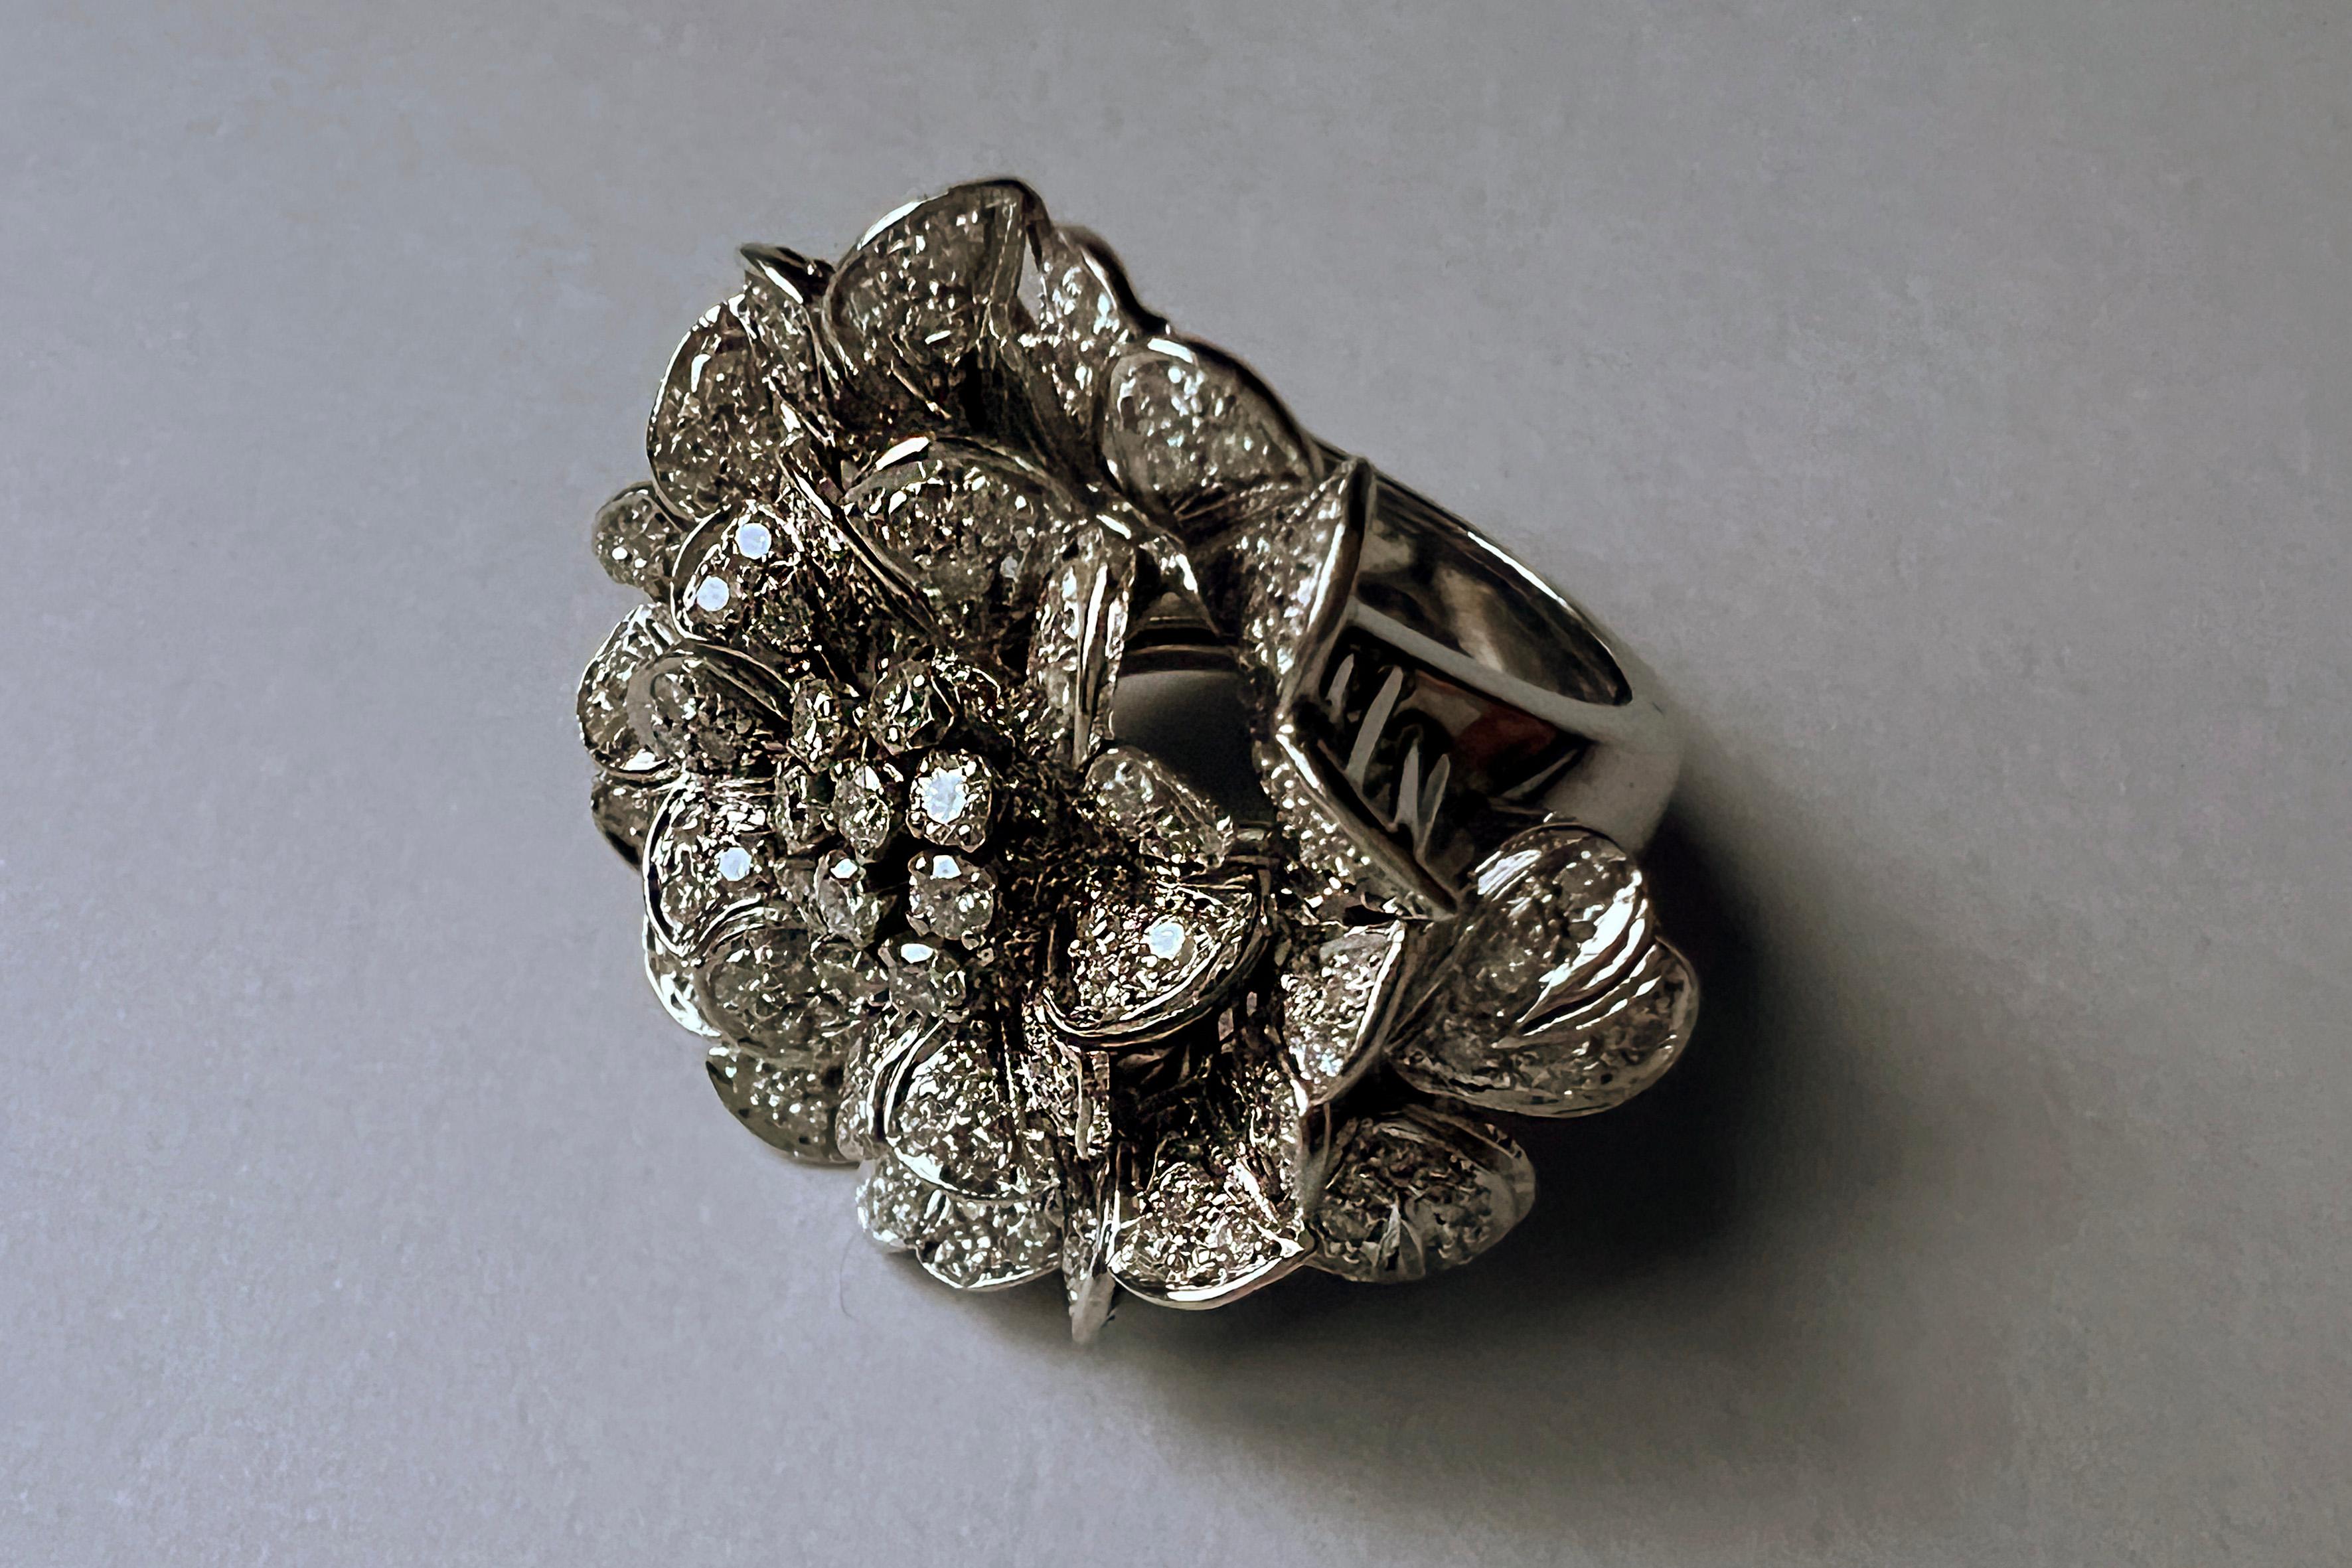 Retro cocktail grand size Petals ring. 18 kt polished white gold with brilliant-cut Diamonds for approximatly 3.65 ct.
Late fifties, made in Italy with Naples hallmarks from a goldsmith laboratory. A truly unique and original piece with a floral